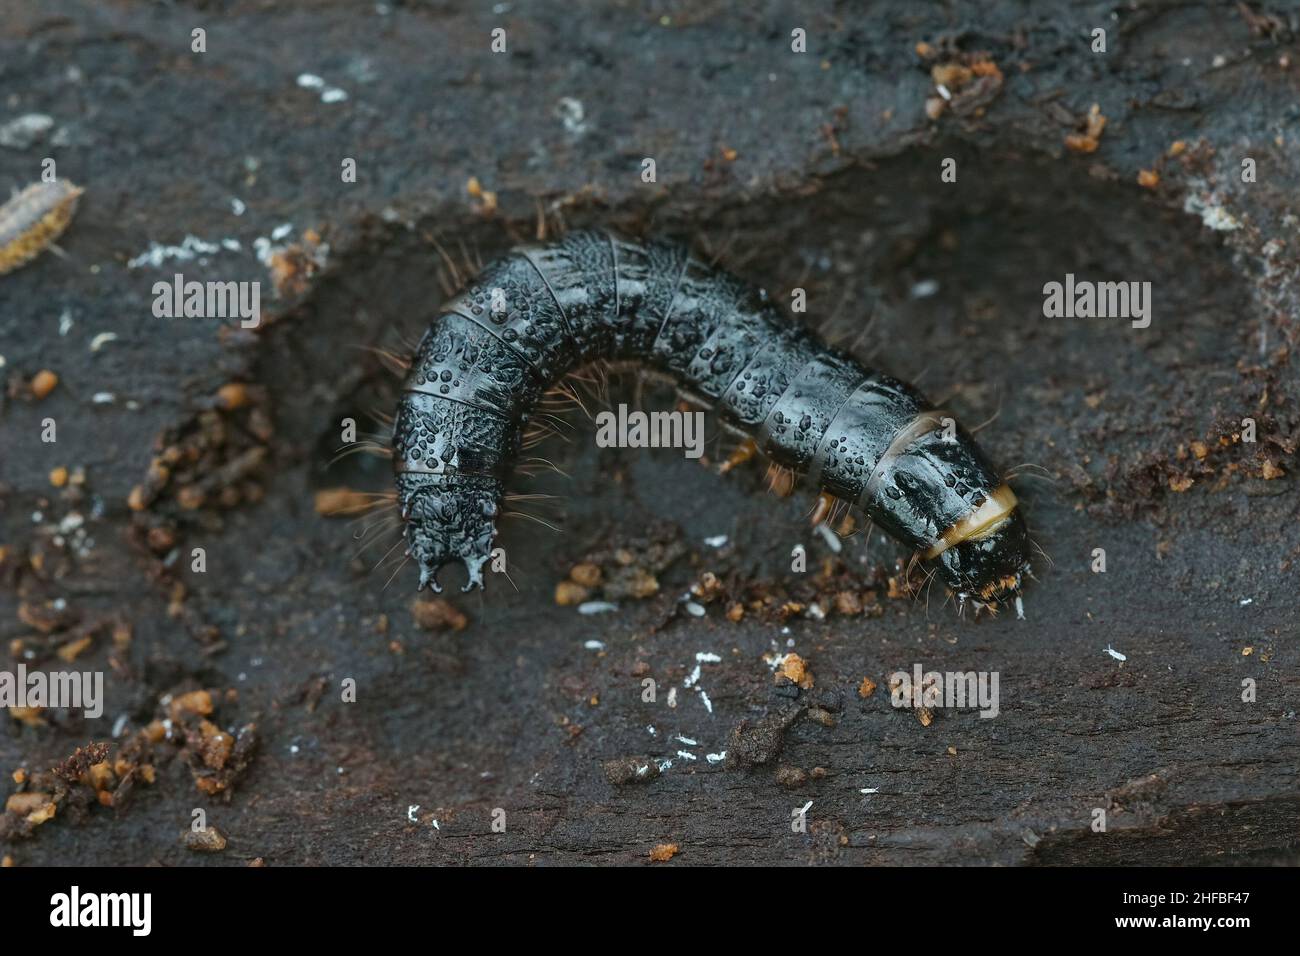 Closeup on the larvae of a clicking beetle Stenagostus rhombeus in the wood of a decaying beech tree in the forest Stock Photo